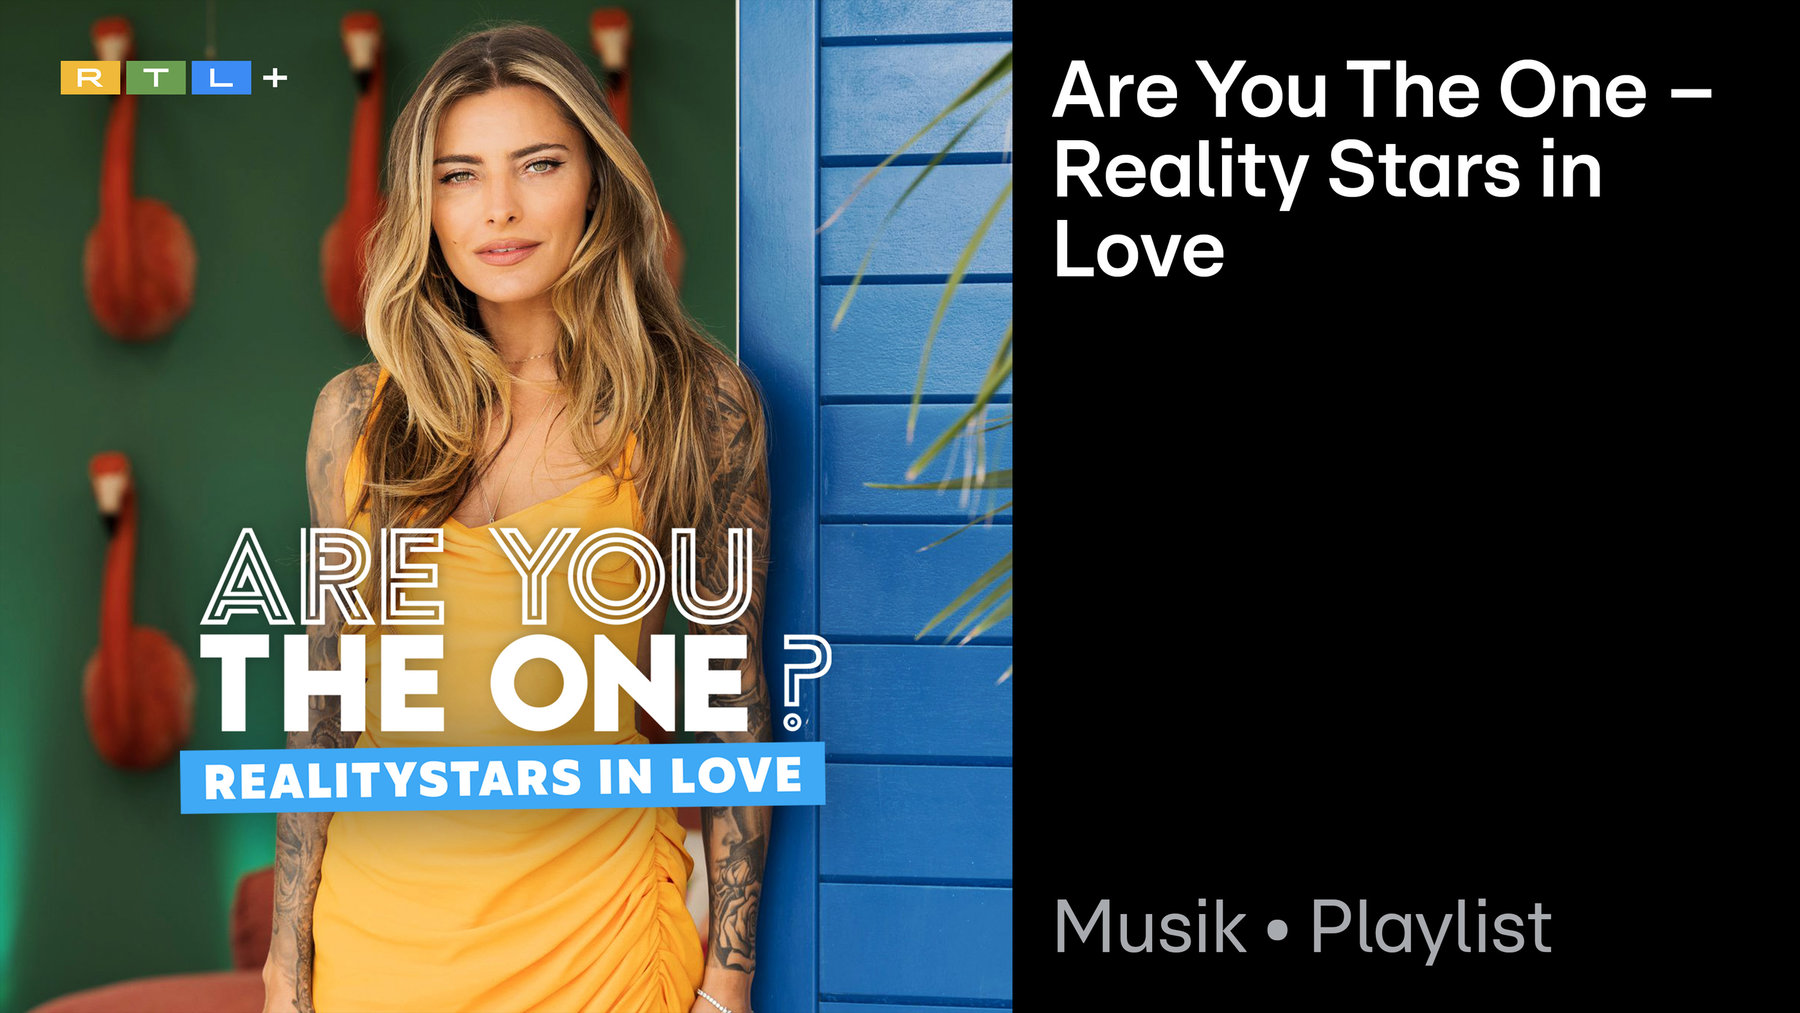 Are You The One? - Realitystars in Love